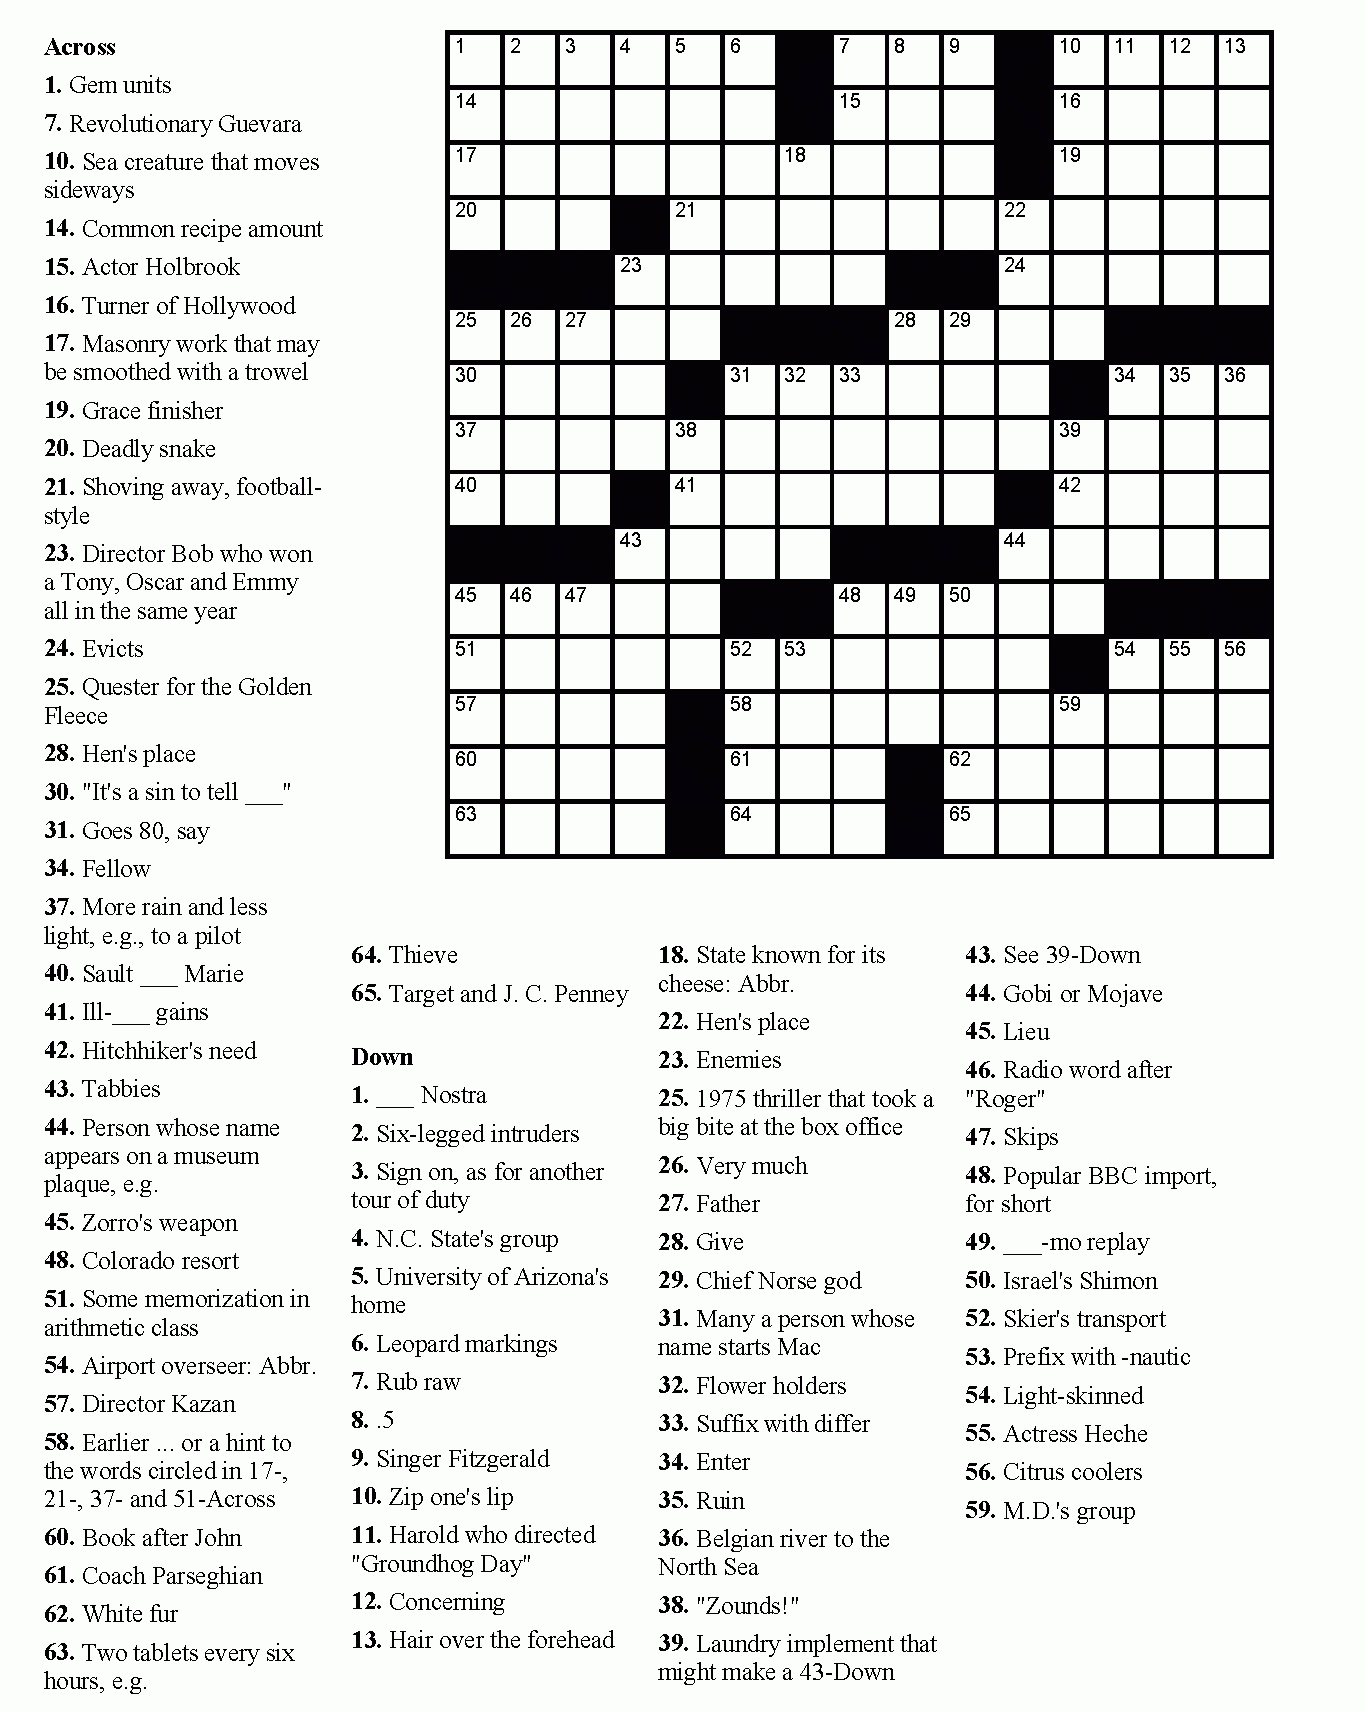 Free Printable Crossword Puzzles Easy For Adults | My Board - Free - Printable Crossword Puzzles Pdf Easy